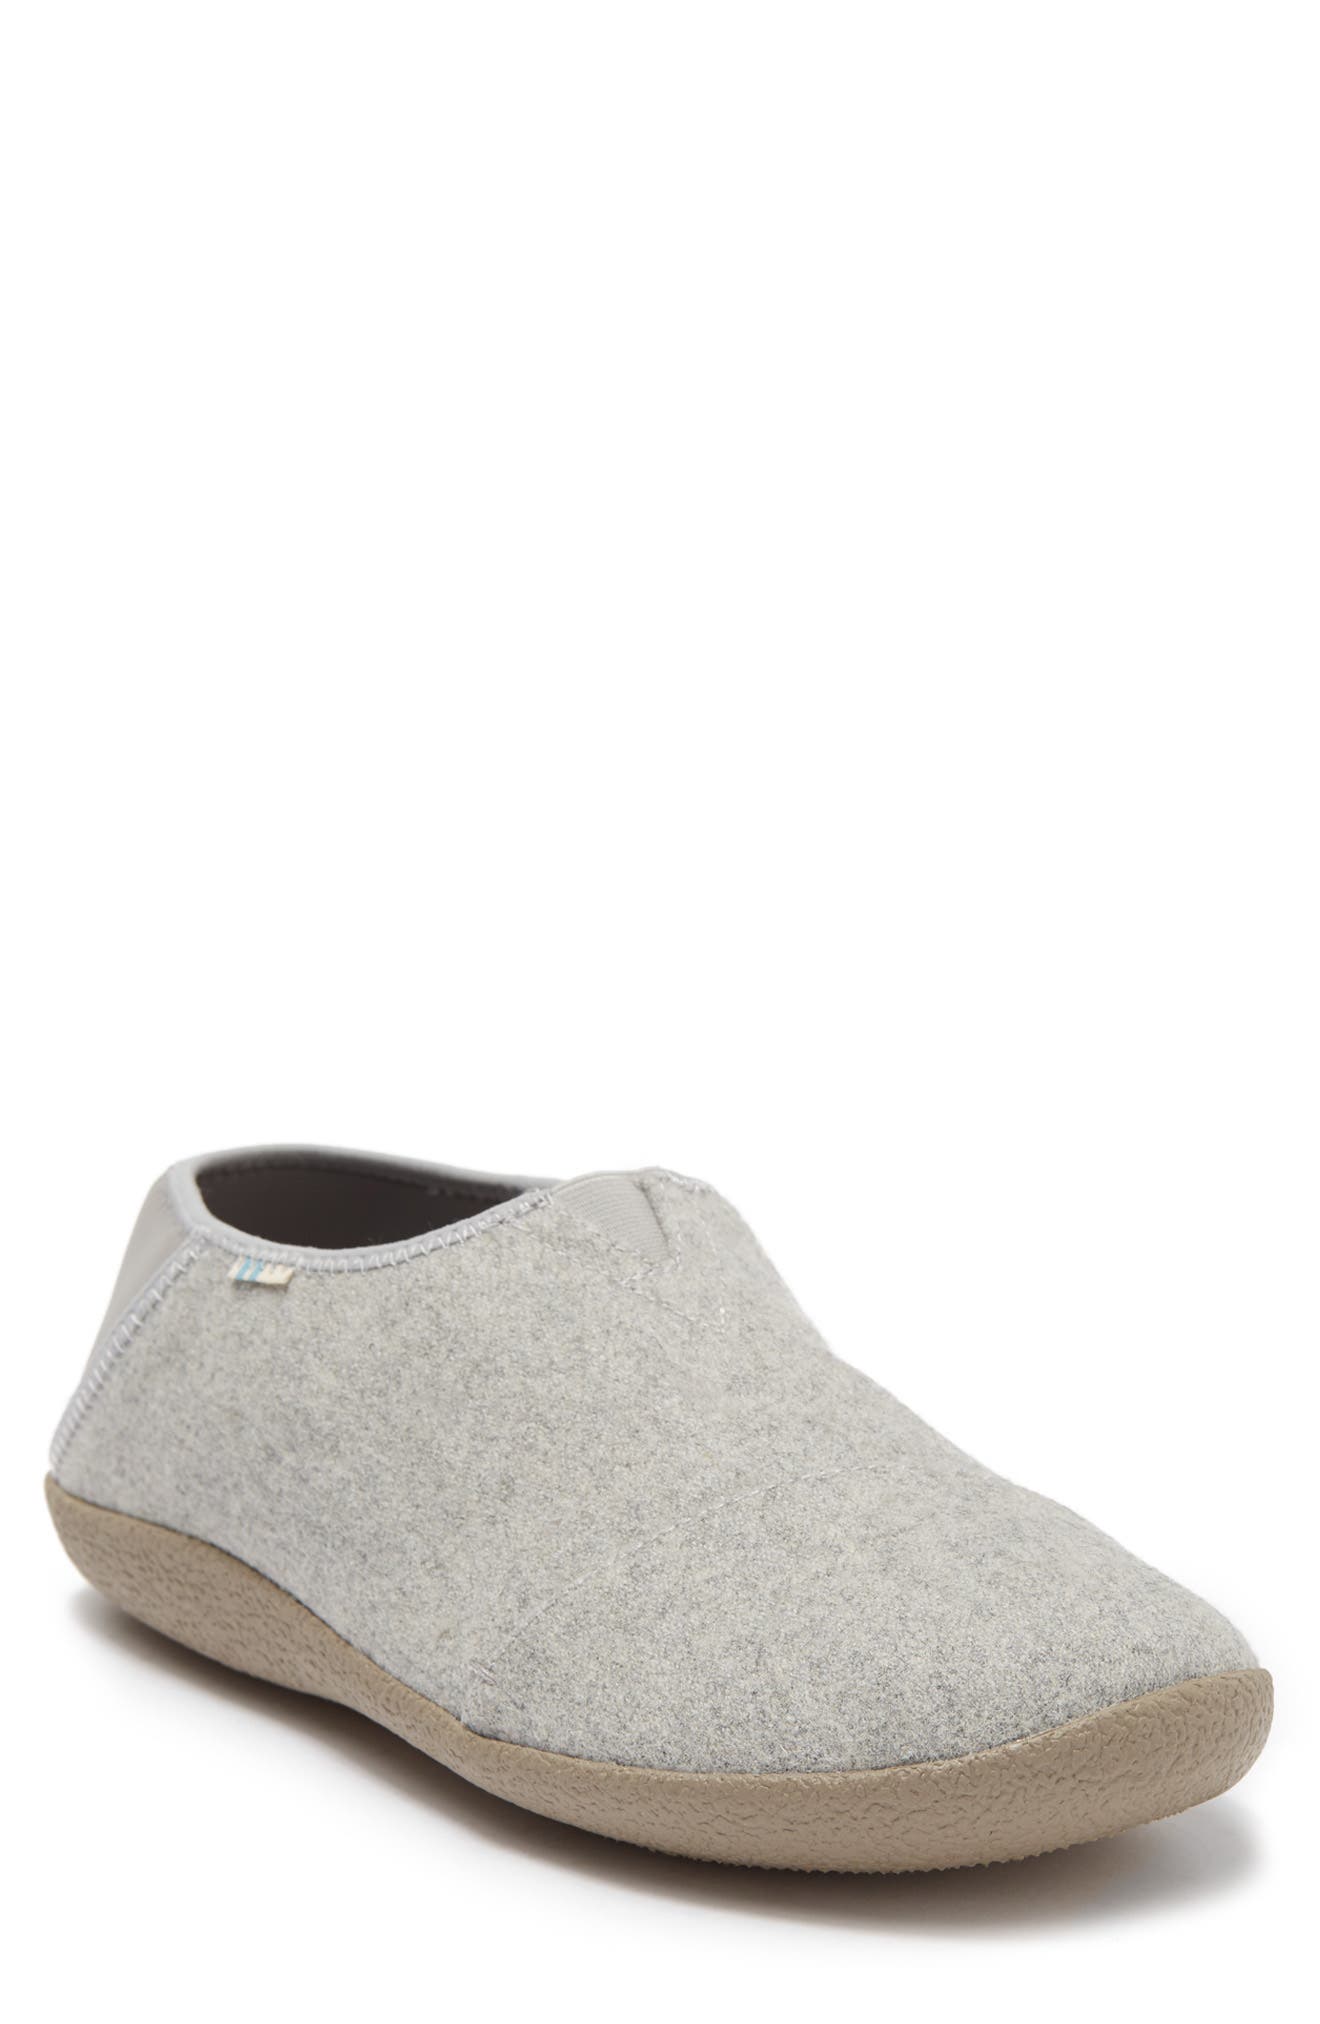 Toms Rodeo Felted Faux Fur Lined Slipper In Drizzle Grey Felt